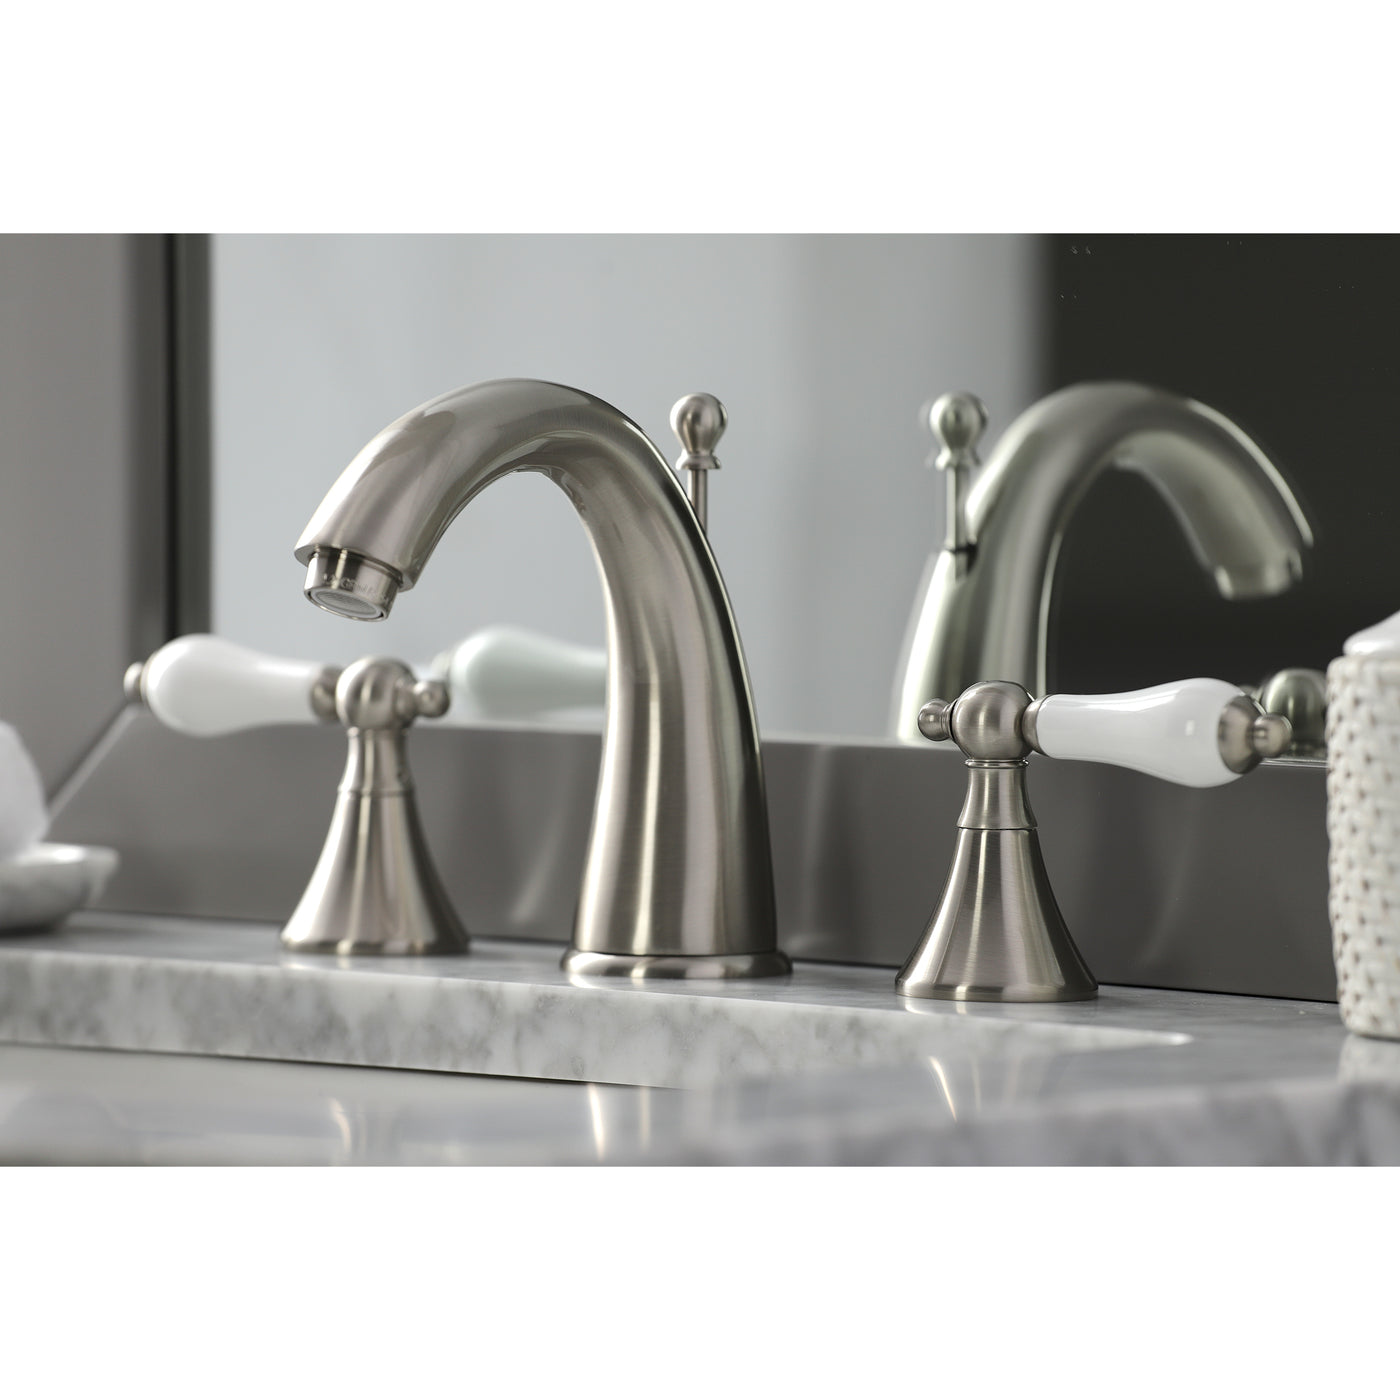 Elements of Design ES2978PL Widespread Bathroom Faucet with Brass Pop-Up, Brushed Nickel